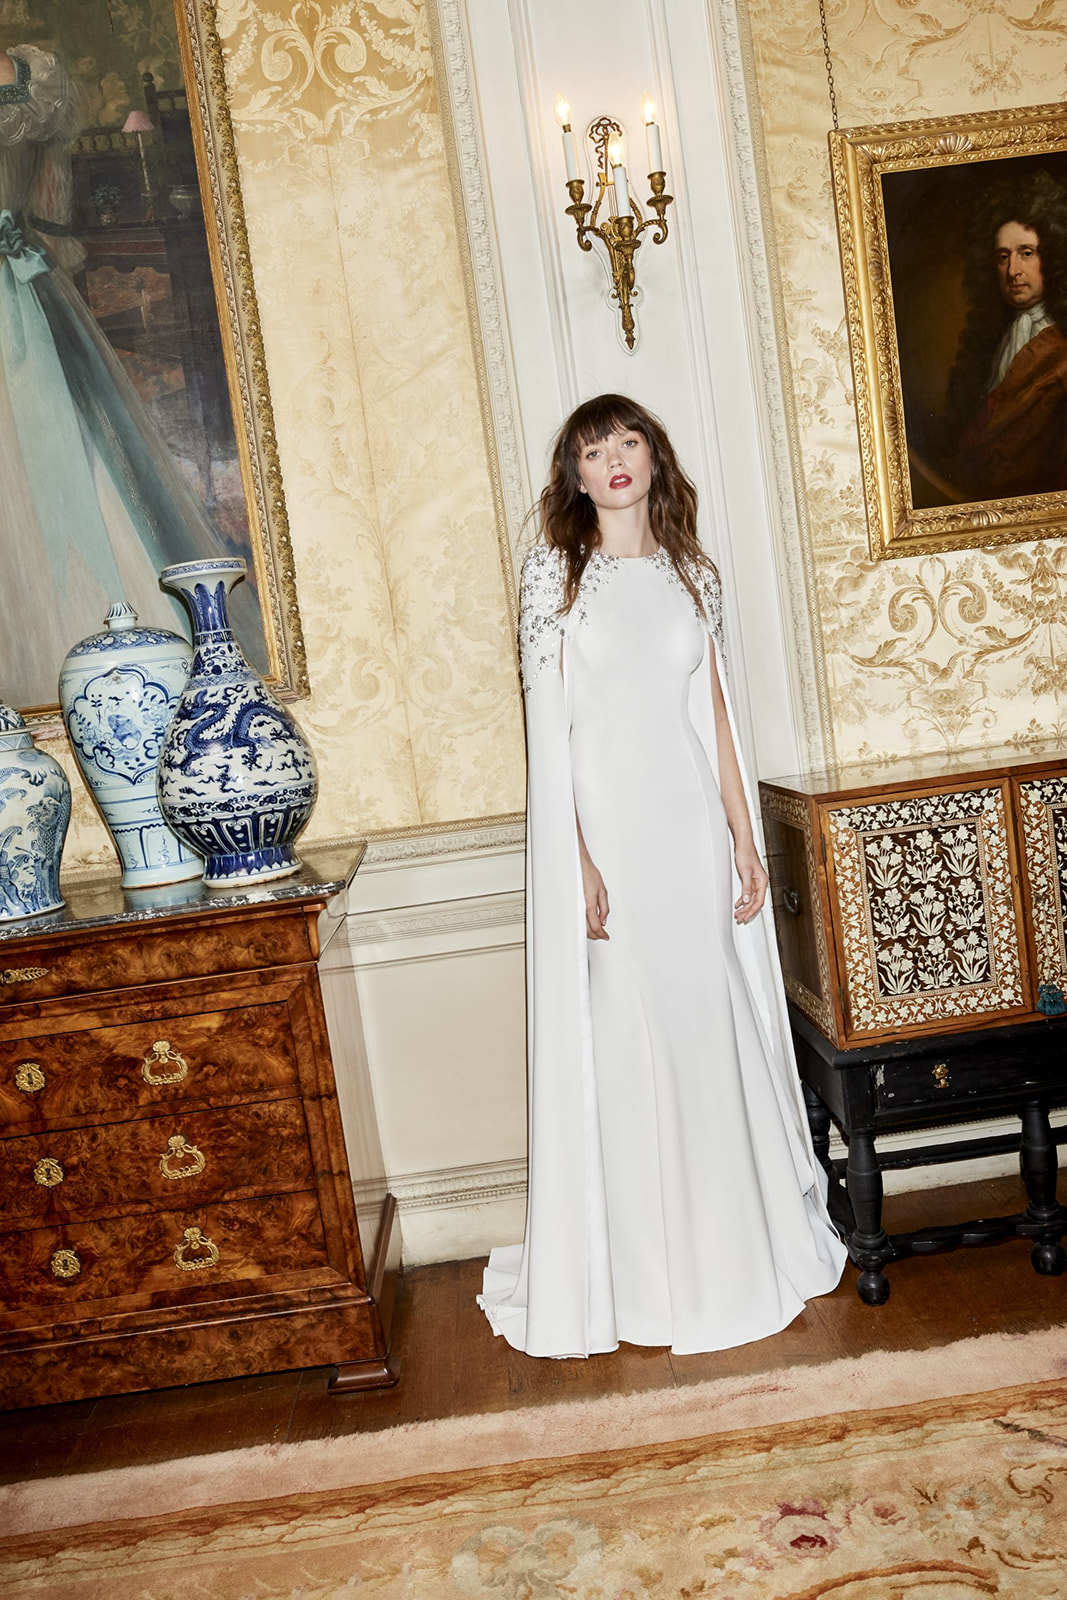 Jenny Packham Bridal: With flowing fabrics, intricate embellishments, and romantic silhouettes.